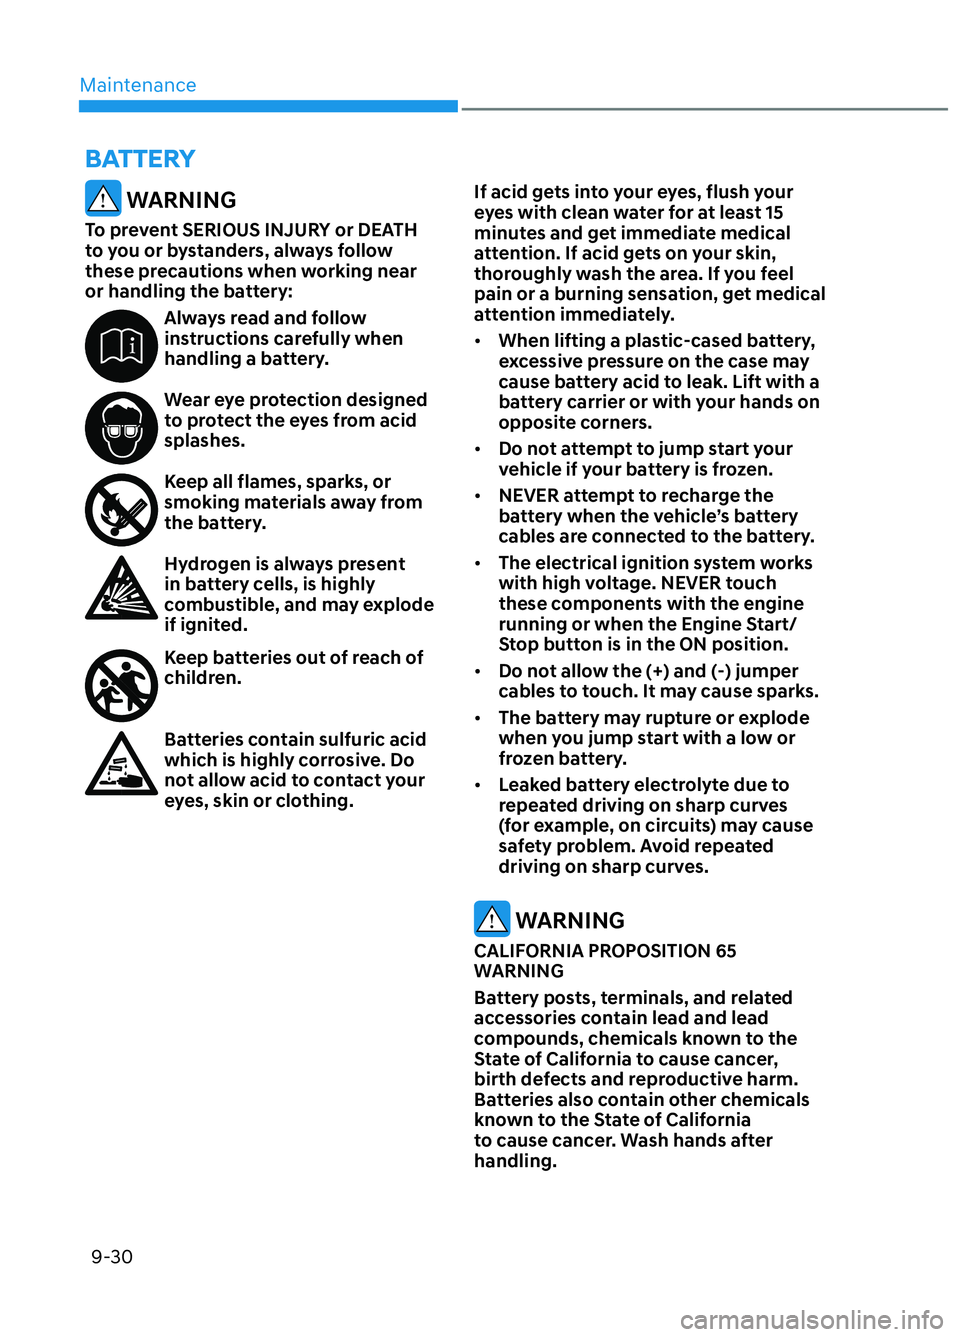 HYUNDAI ELANTRA N 2022  Owners Manual Maintenance9-30
 WARNING
To prevent SERIOUS INJURY or DEATH 
to you or bystanders, always follow 
these precautions when working near 
or handling the battery:
Always read and follow 
instructions car